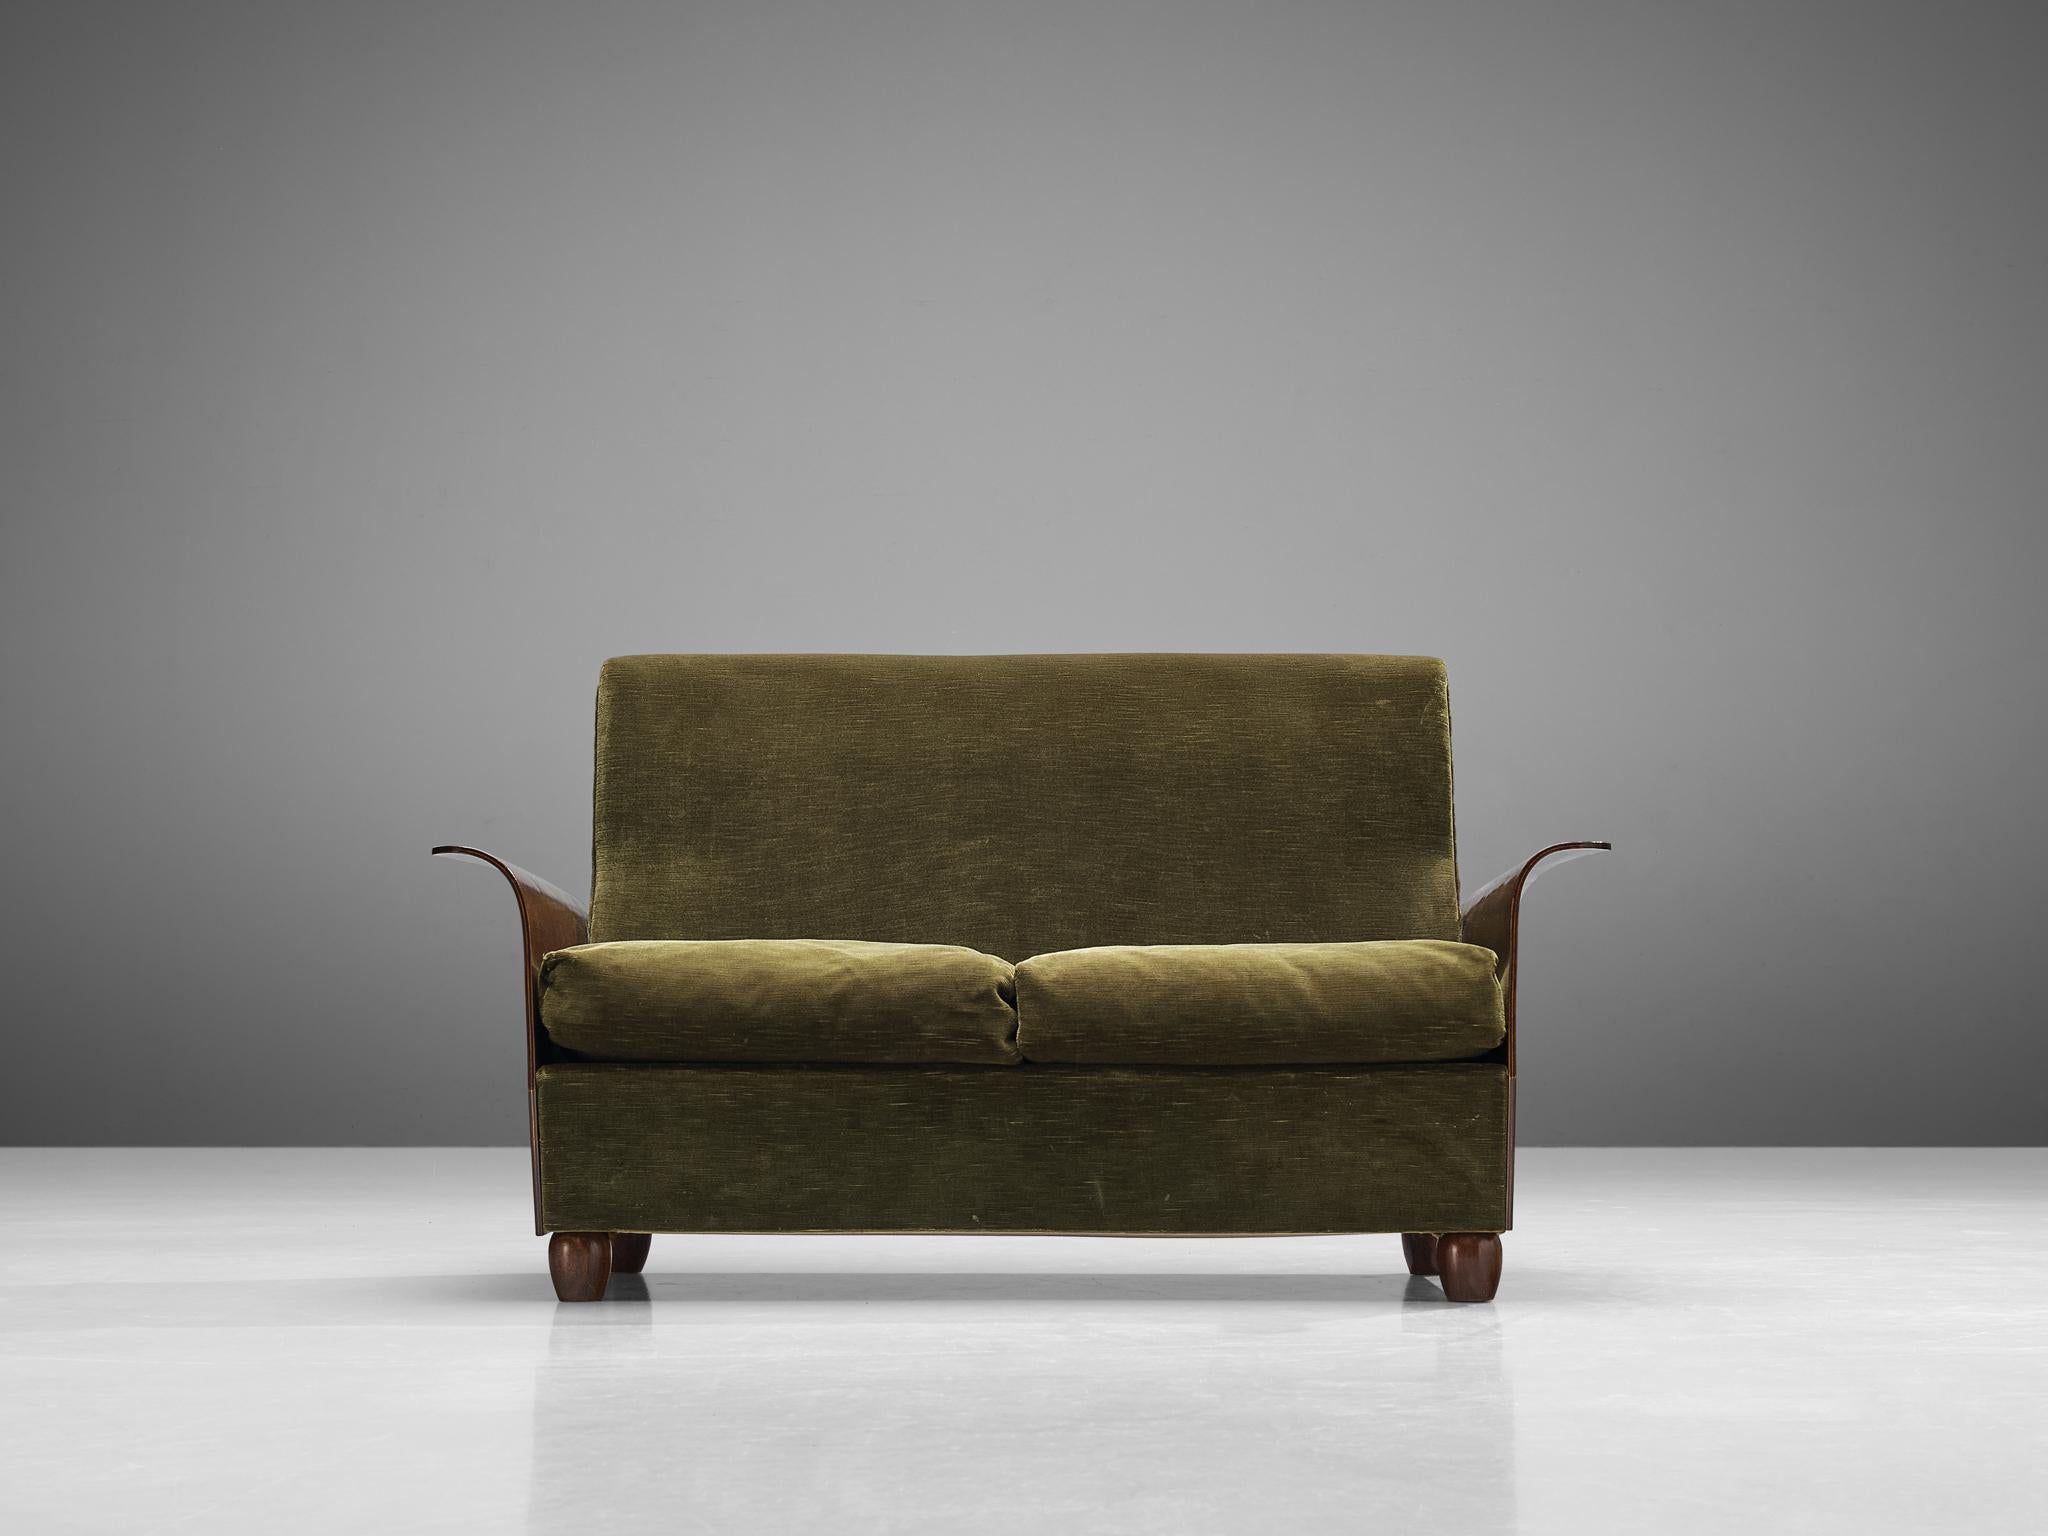 Exquisite Italian Two-Seat Sofa in Green Velvet Upholstery and Mahogany For Sale 1